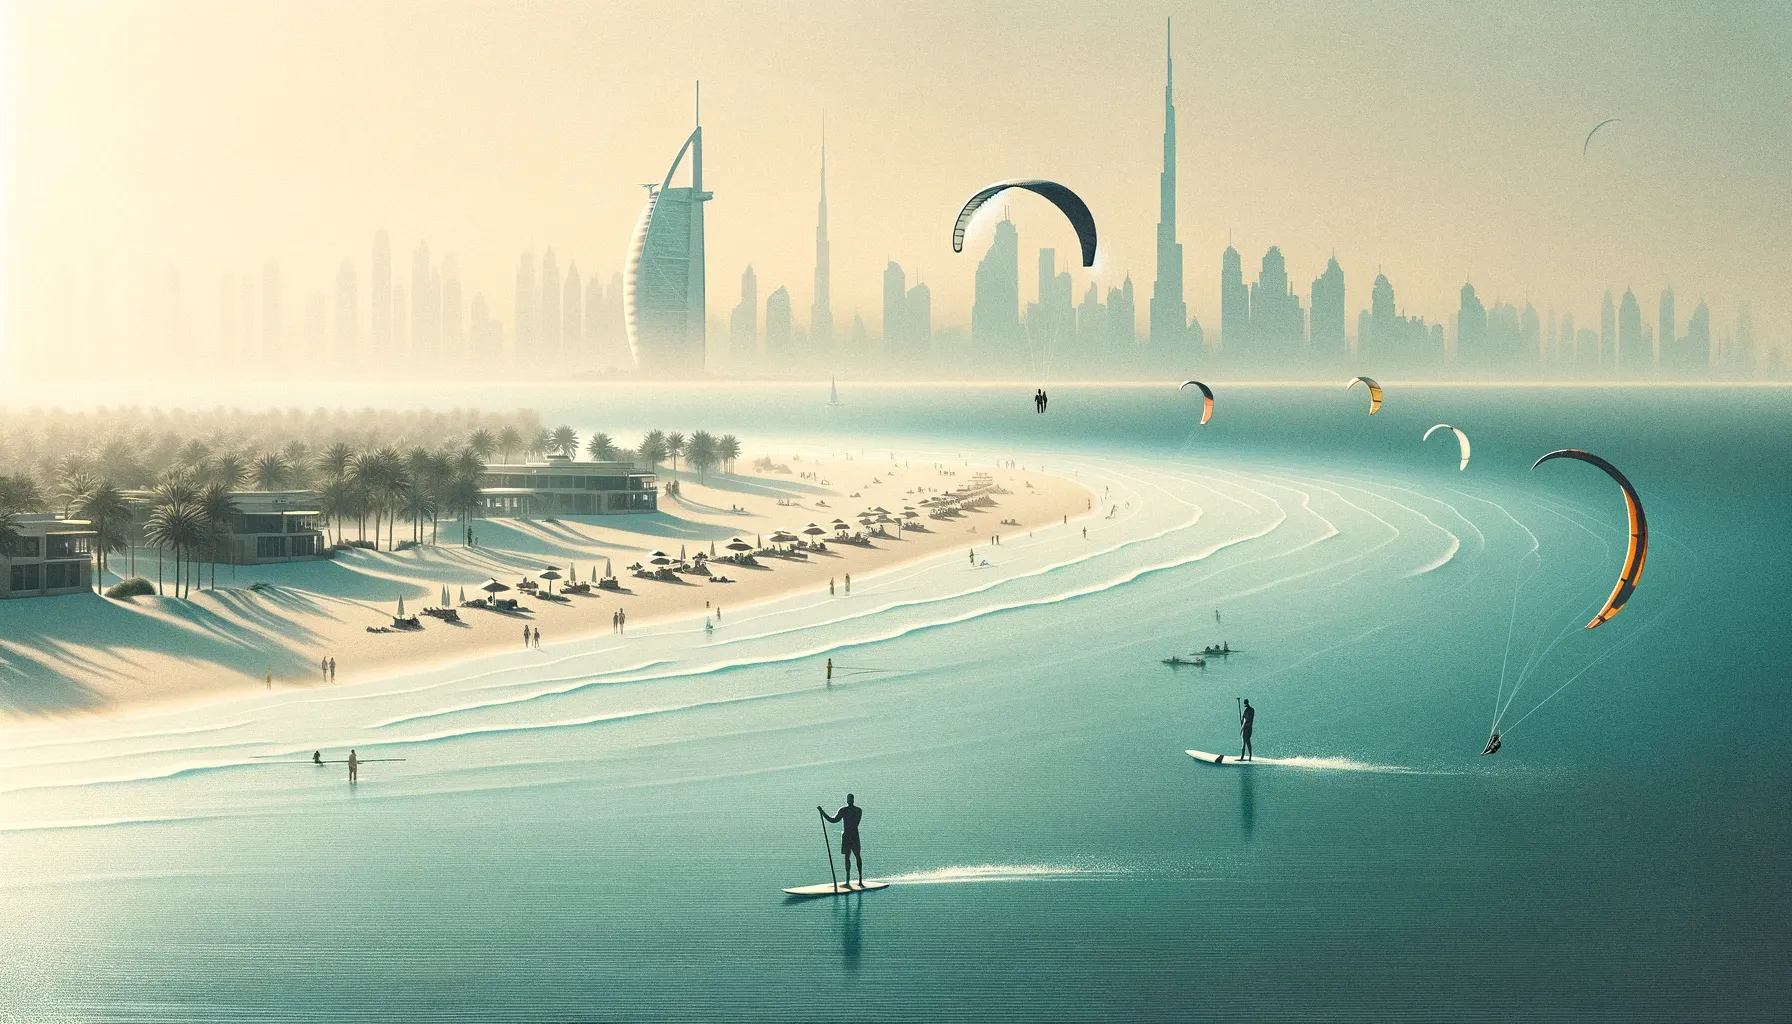 Header image for real sports club blog post about growing waters ports in Dubai